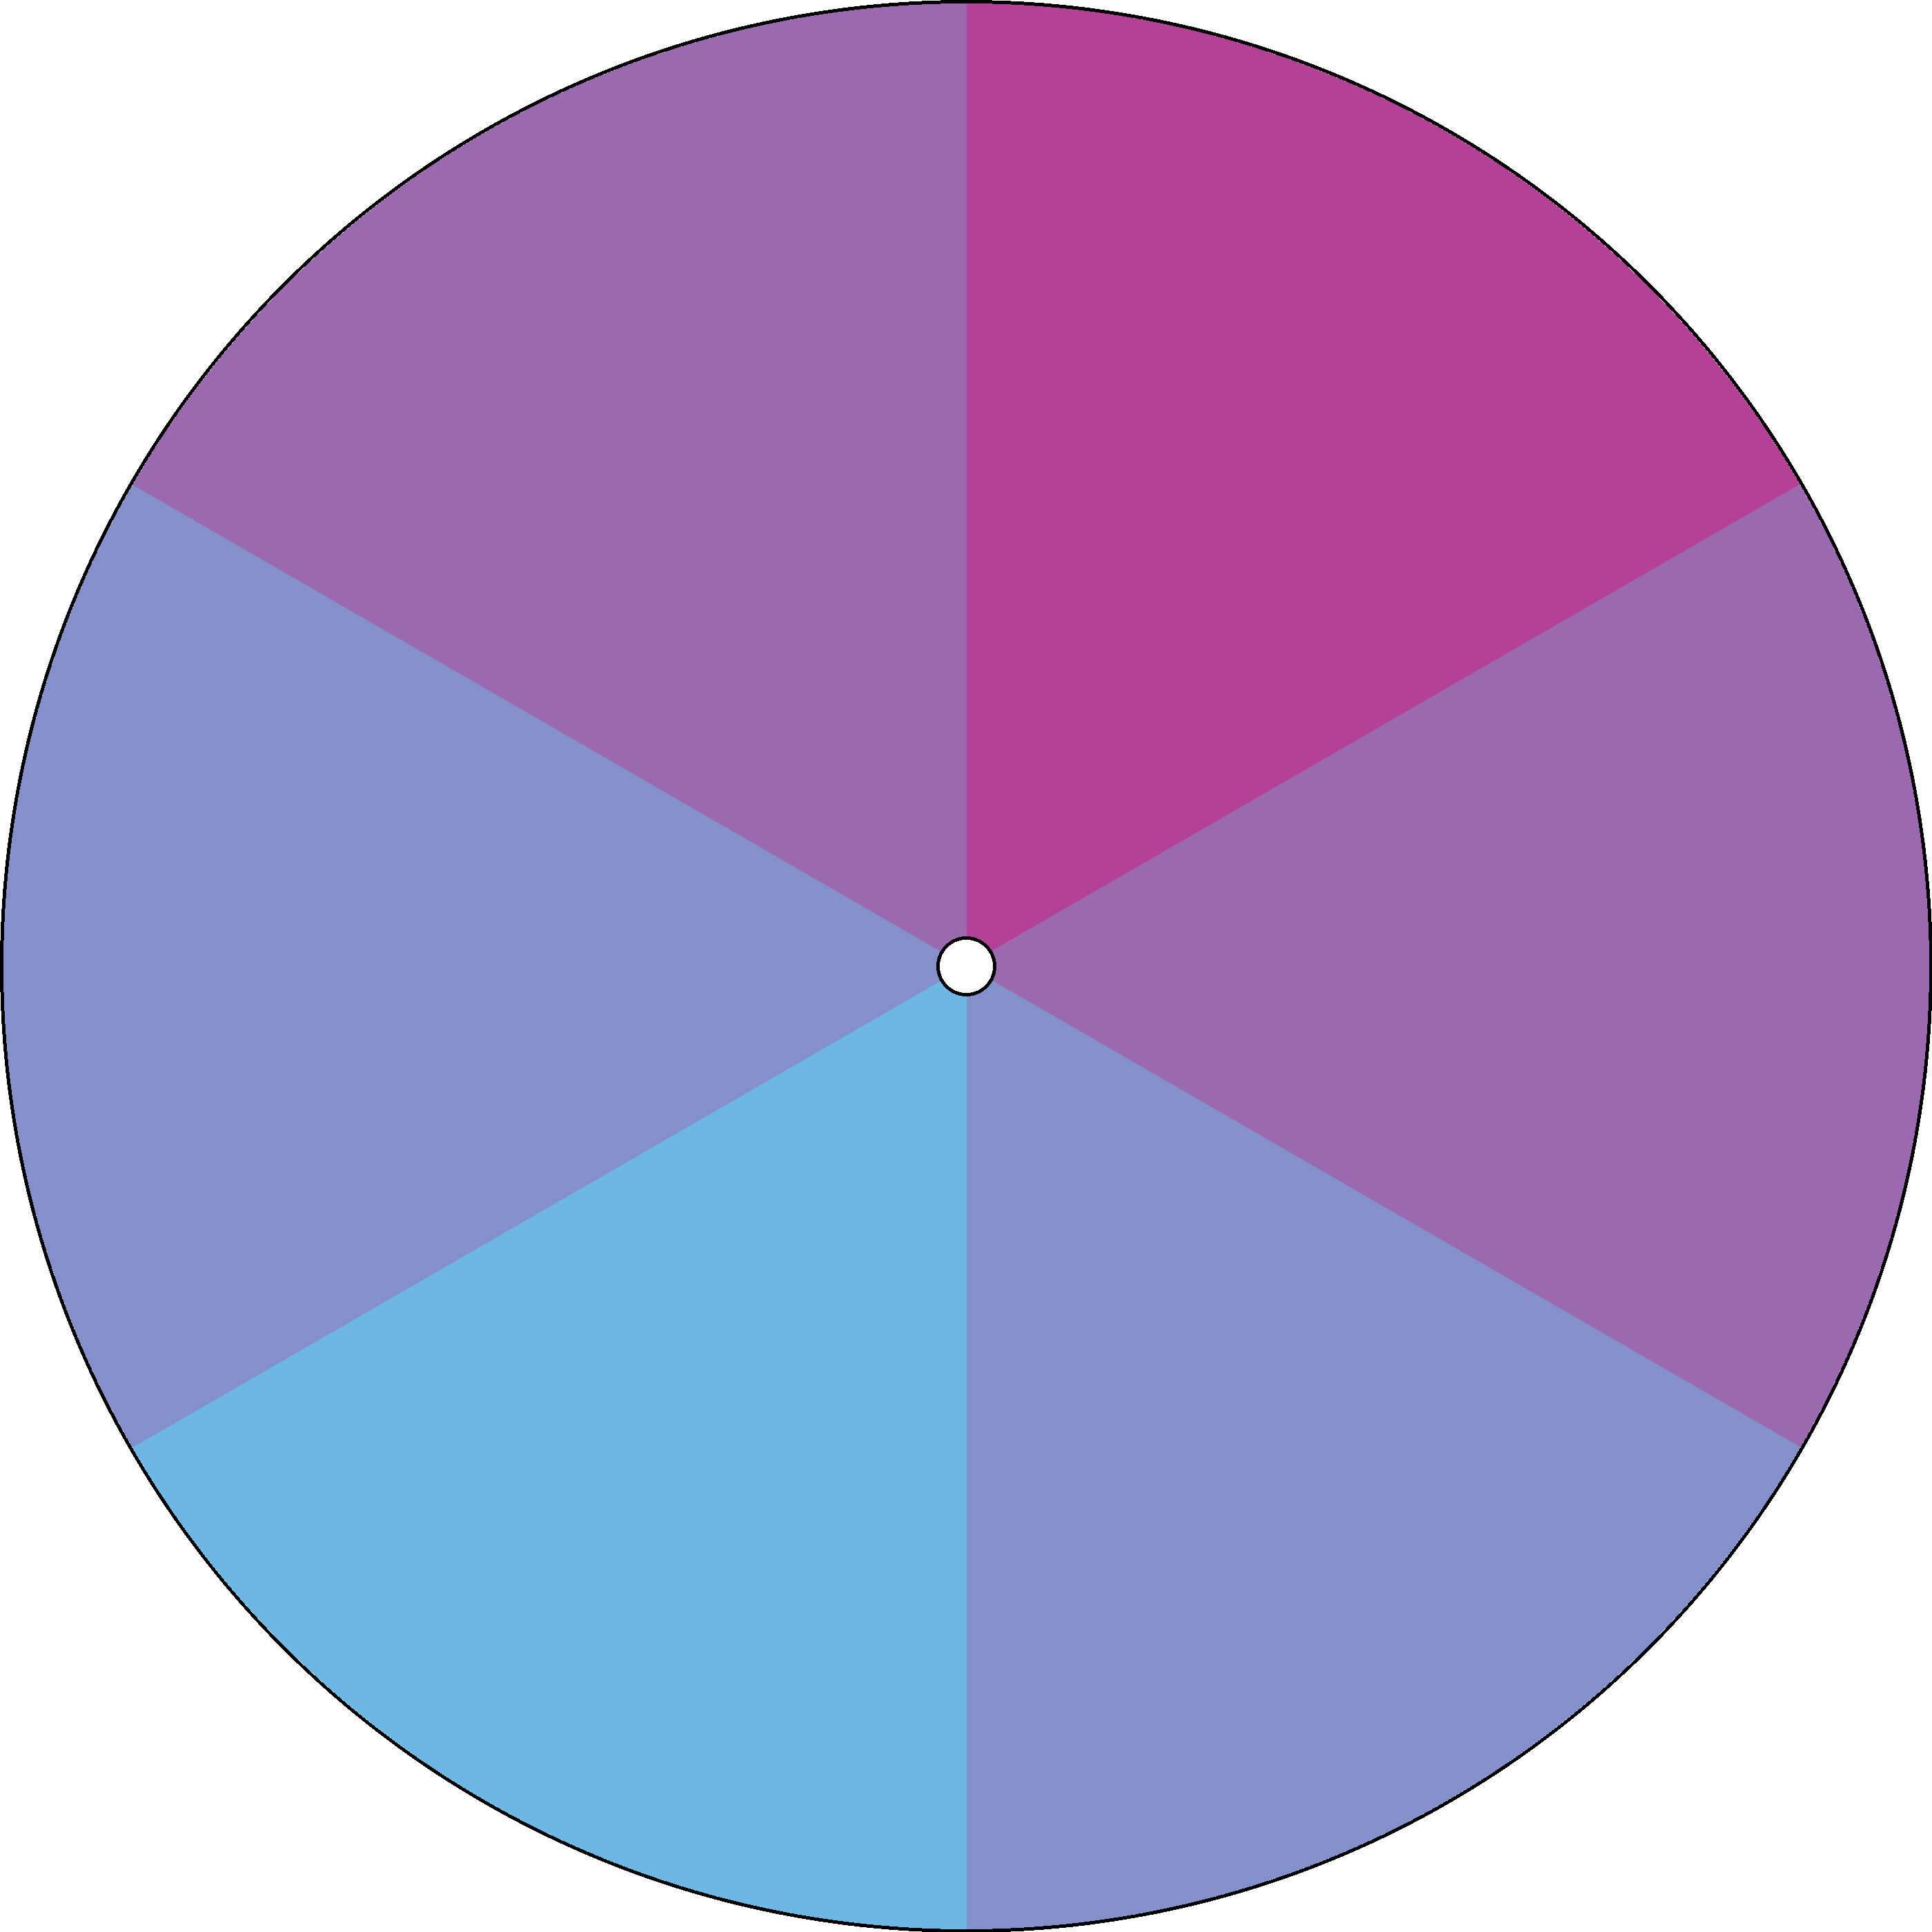 Radial Gradient - Bi-Monthly - Dizzy Care Network 3.png